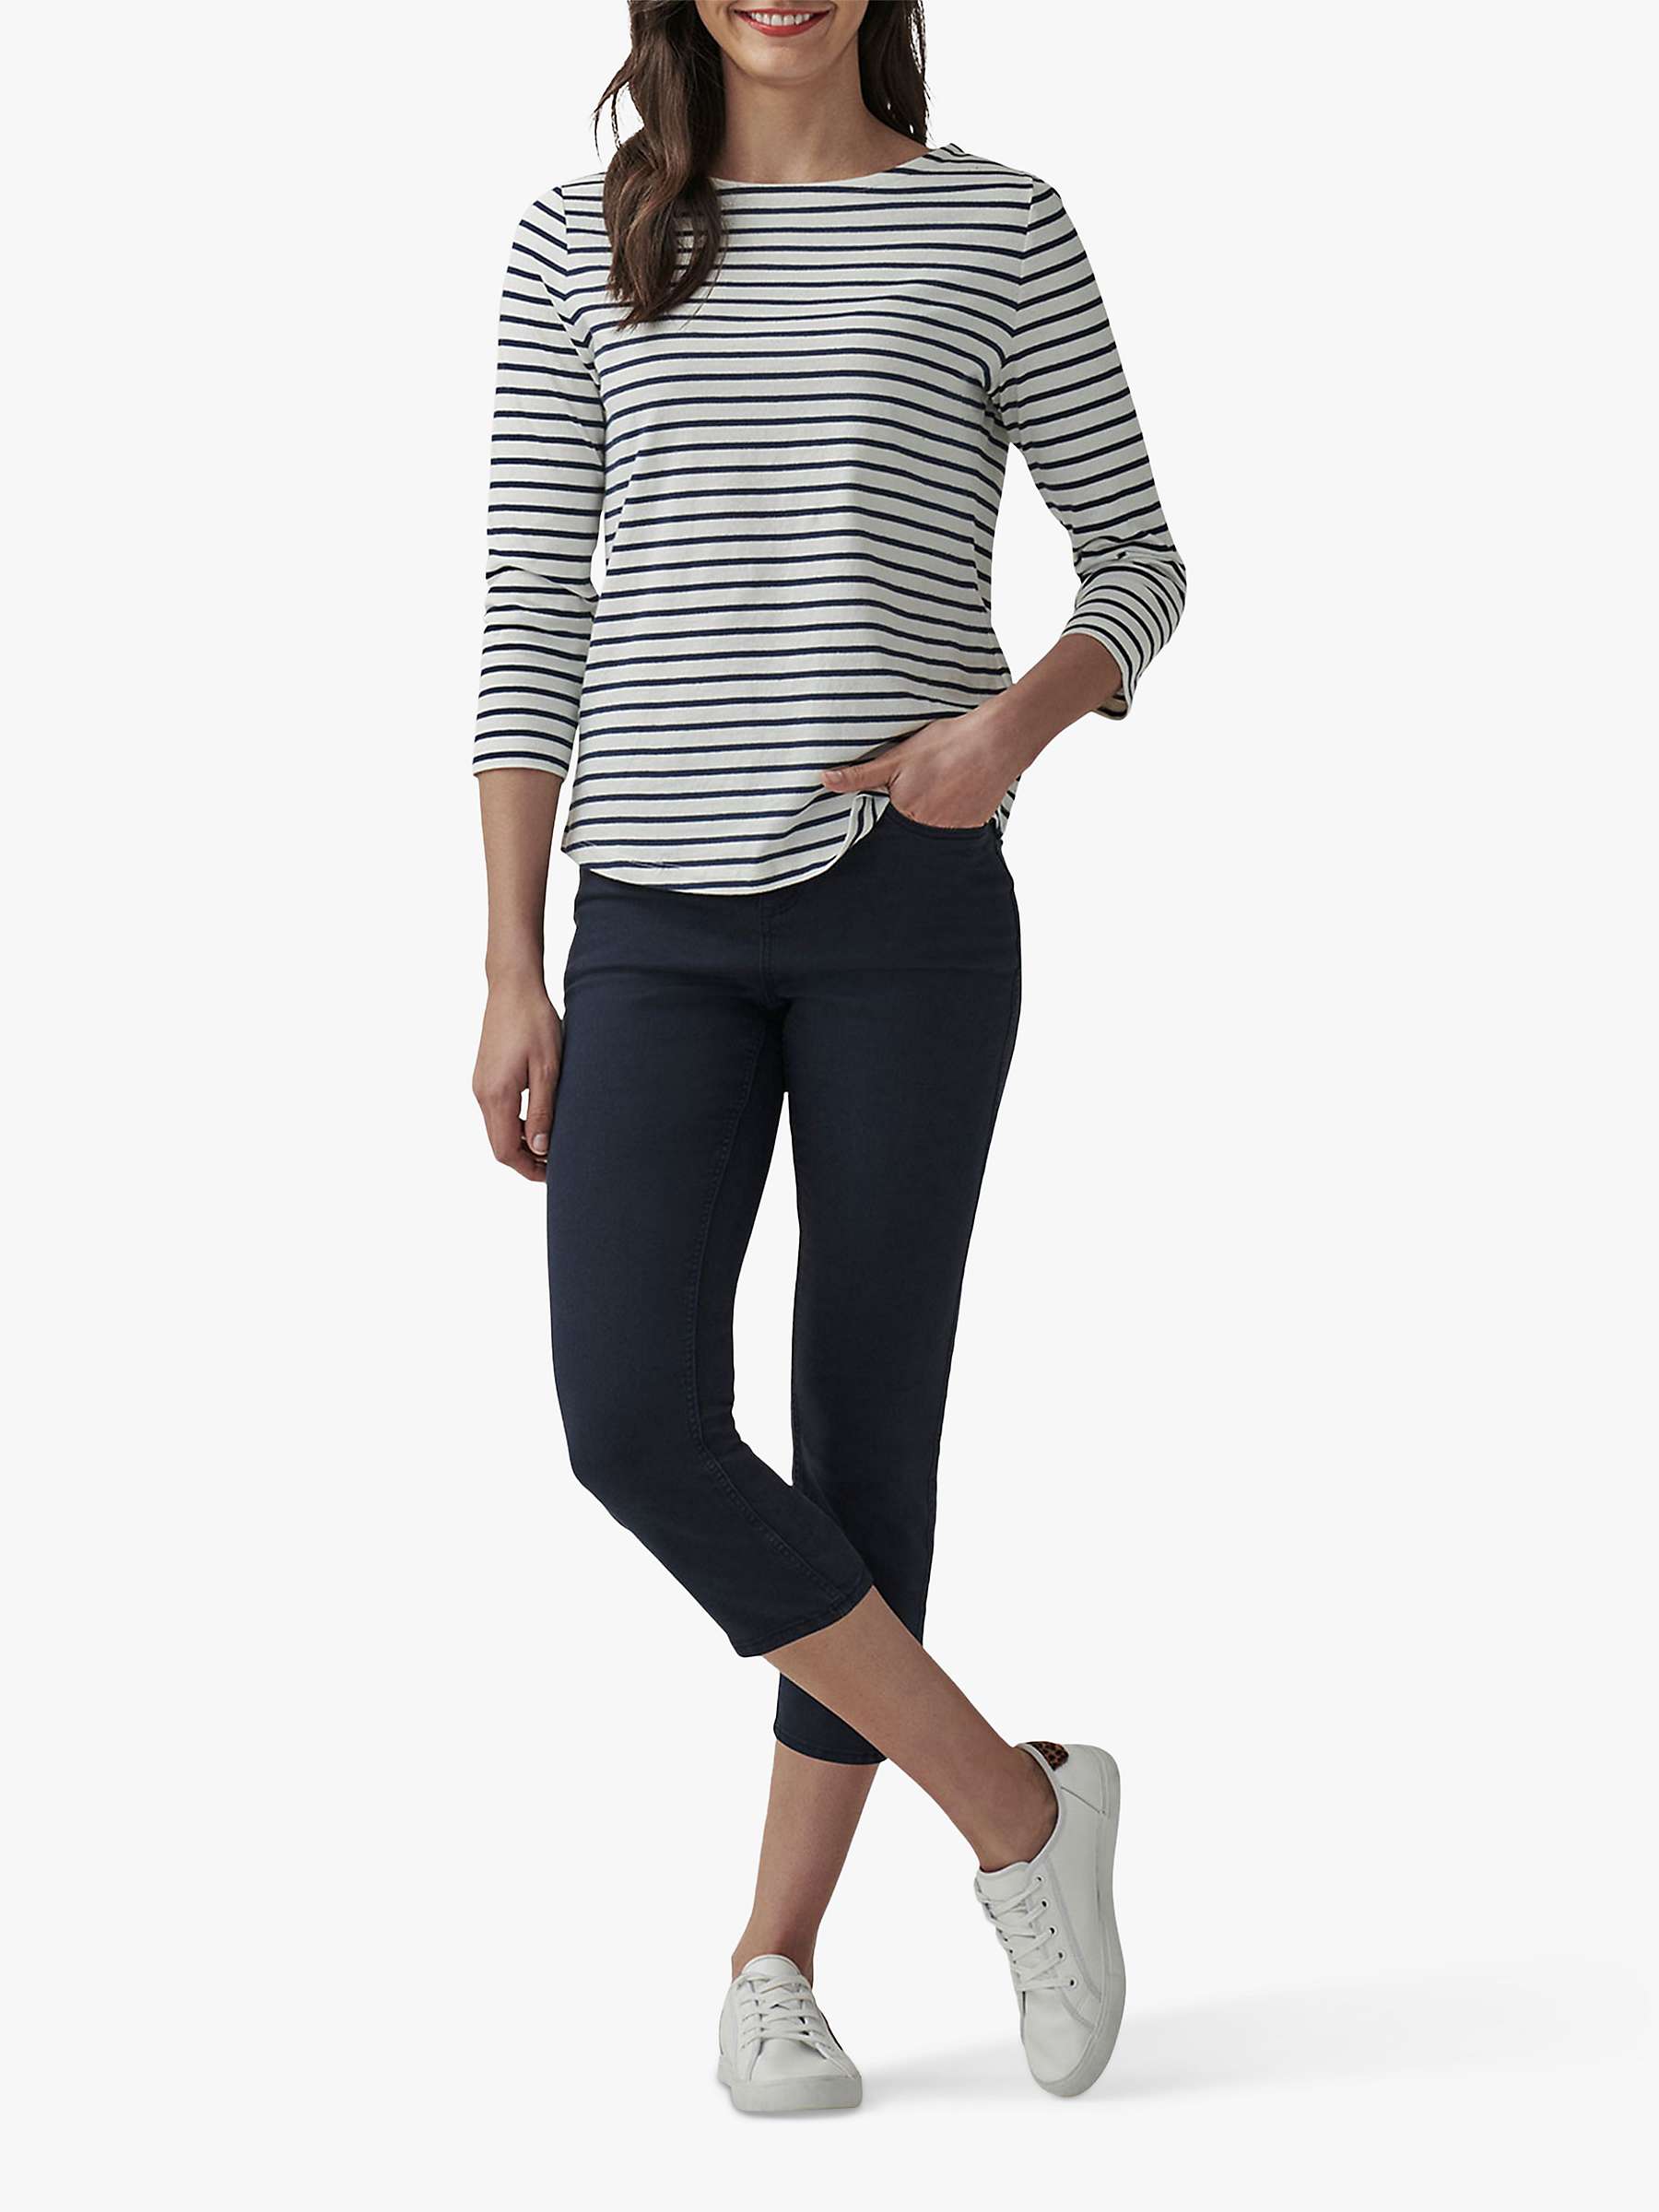 Buy Crew Clothing Cropped Skinny Jeans Online at johnlewis.com